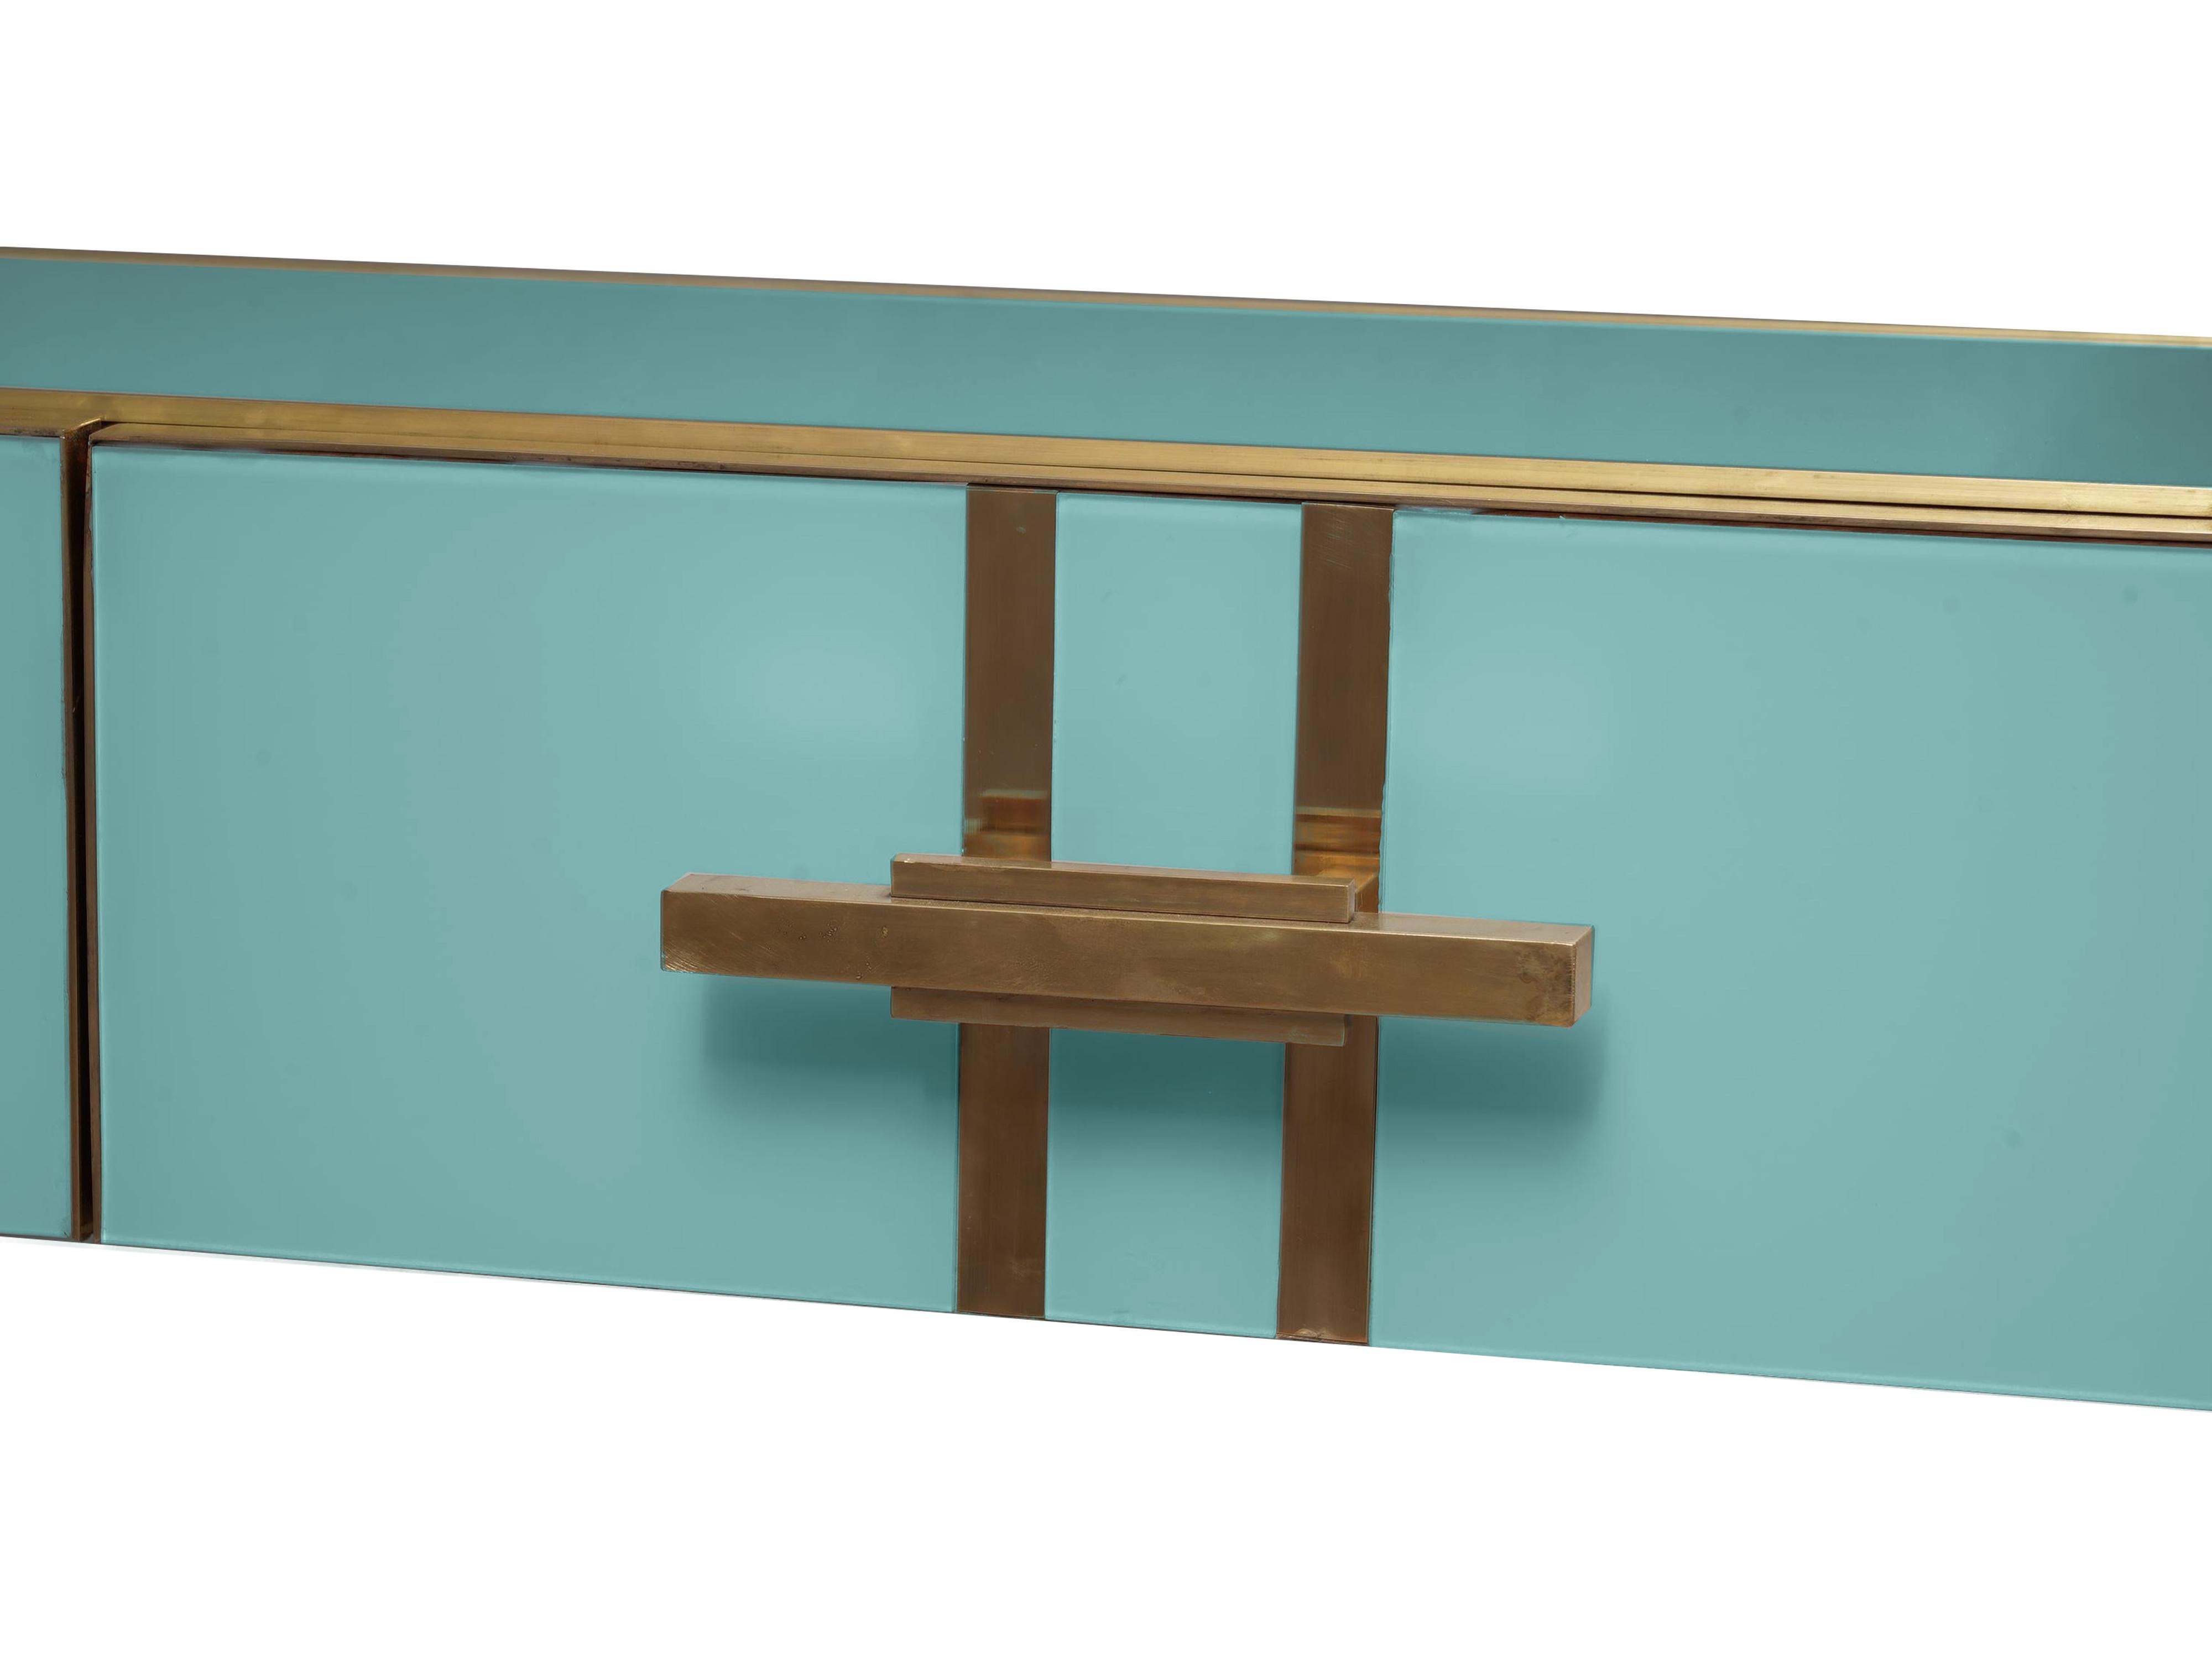 Introducing the magnificent turquoise Murano glass console table with brass legs, a masterpiece of Italian craftsmanship that brings the elegance and sophistication of Mid-Century modern design to your living room. 

This unique console table is a